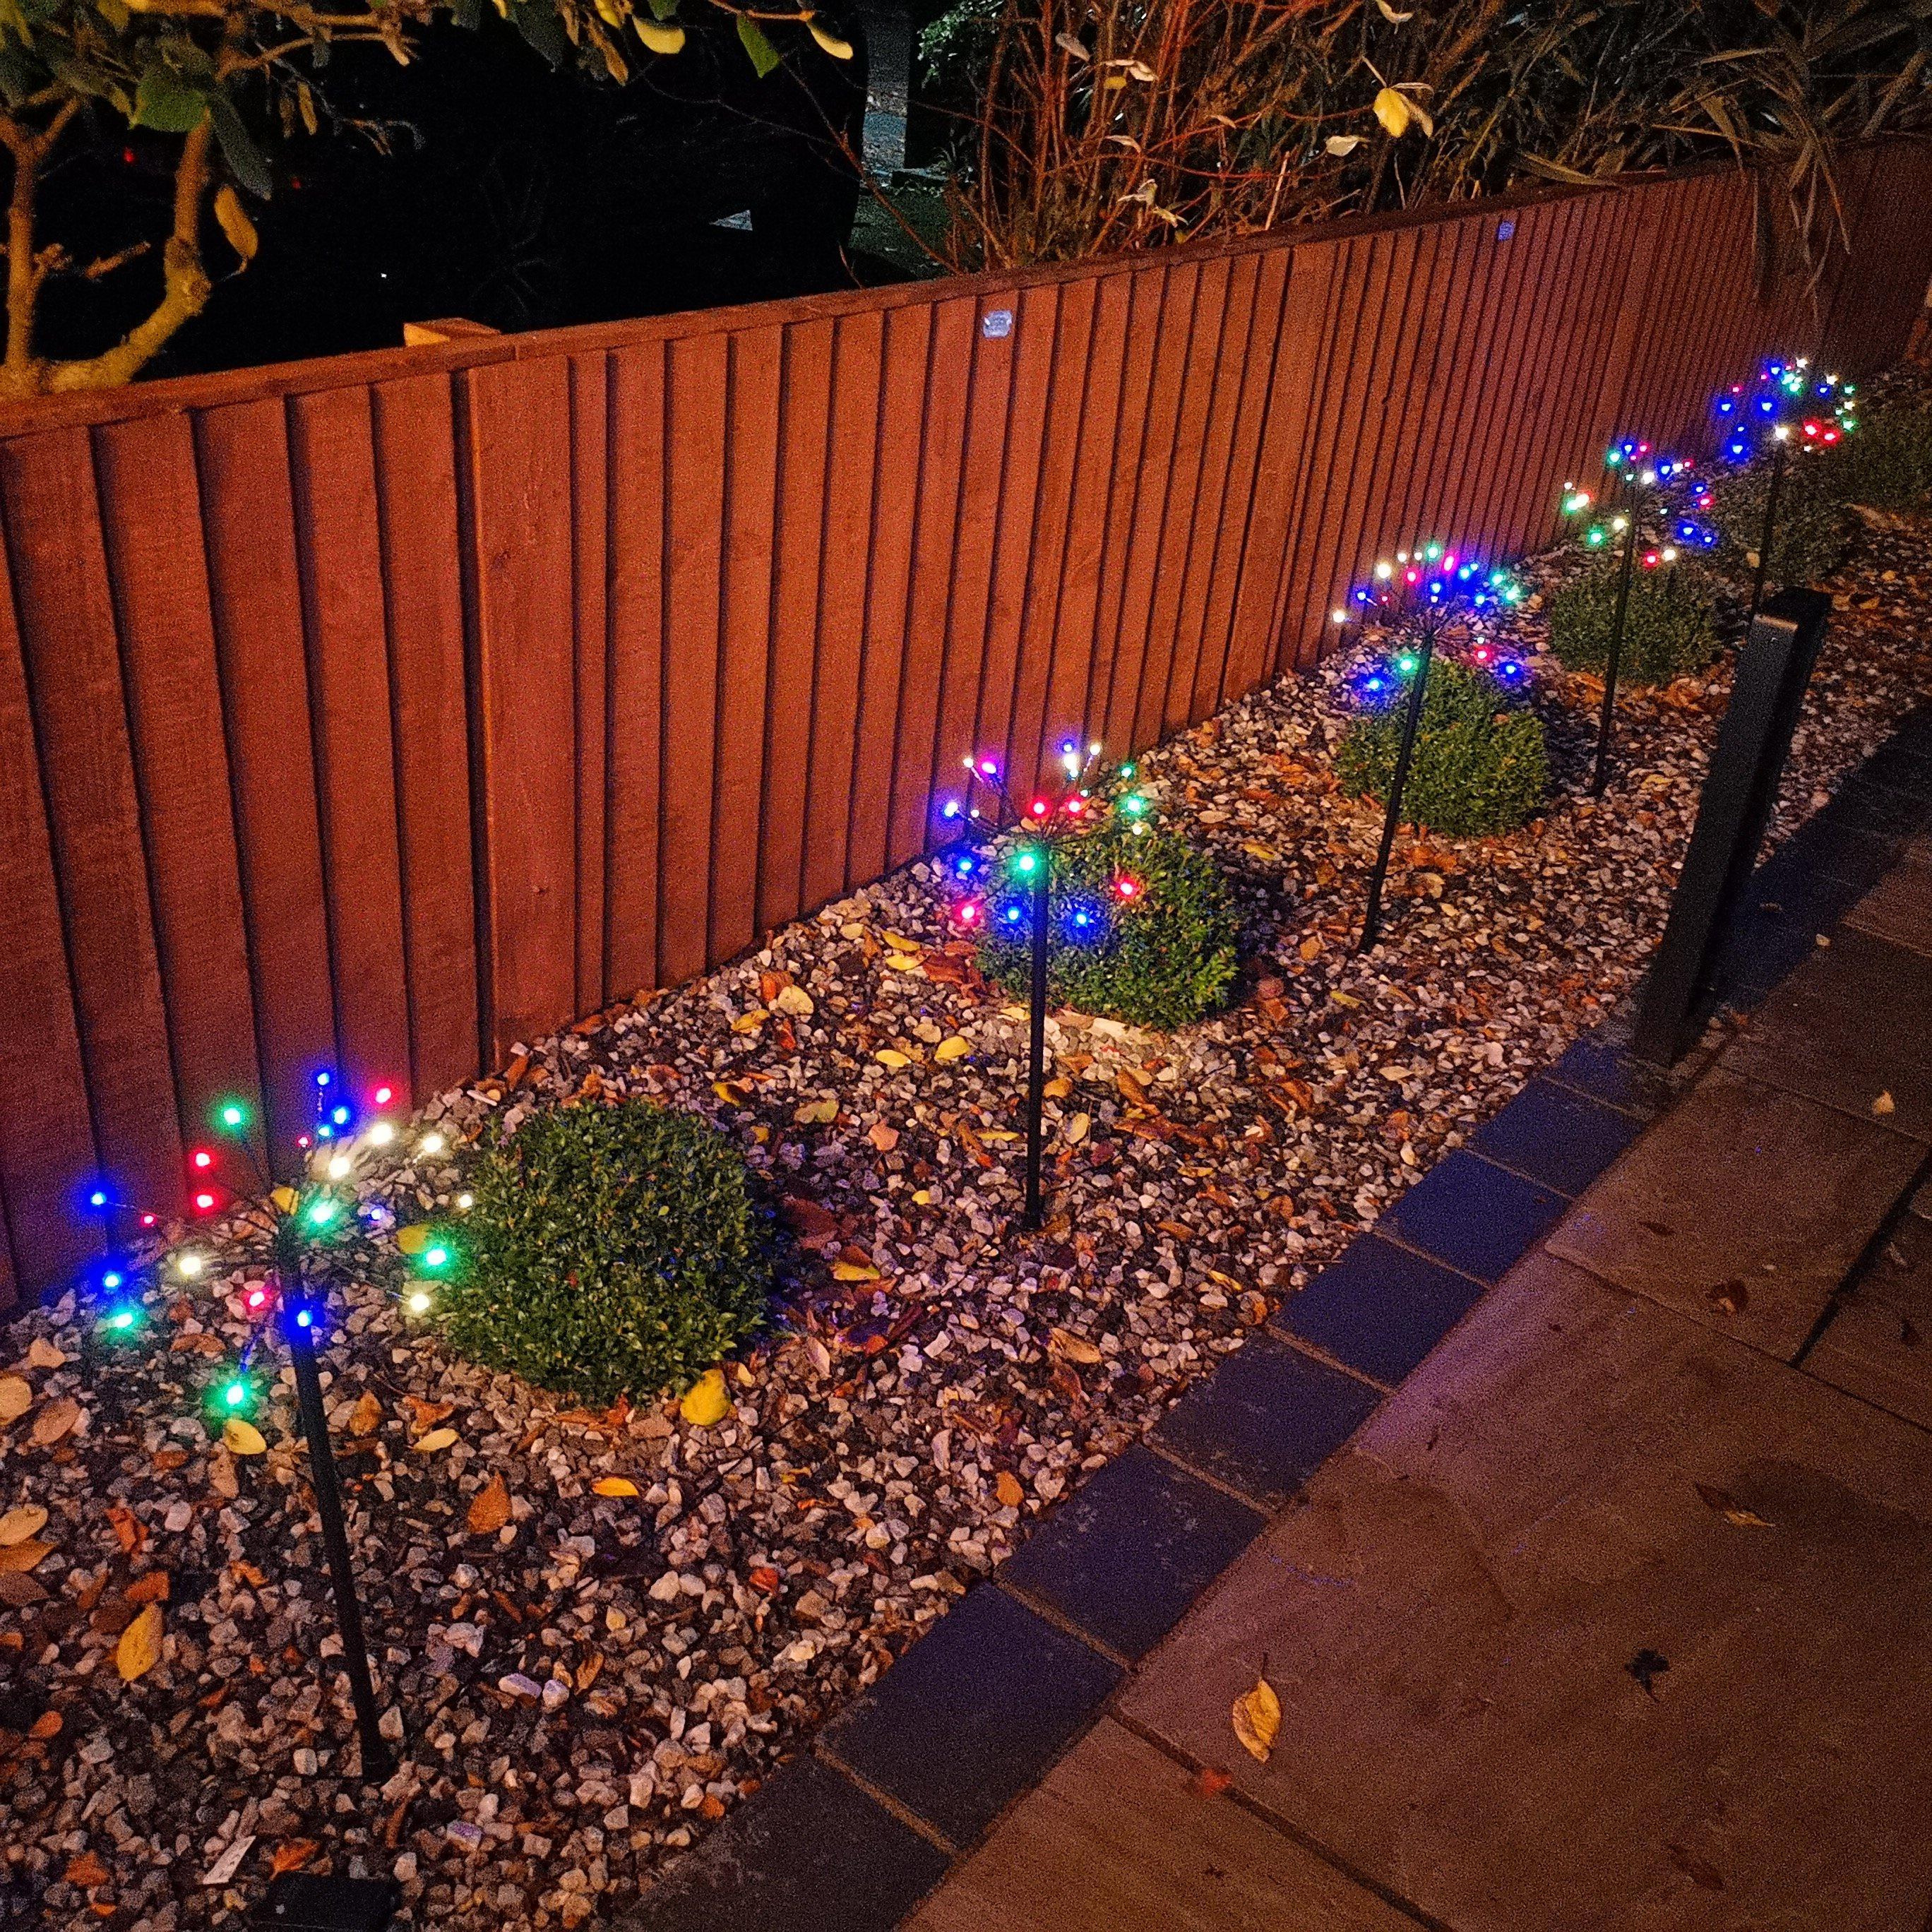 5pcs 63cm 120 LED Battery Operated Sparkler Path Lights with Timer in Multicoloured - image 1